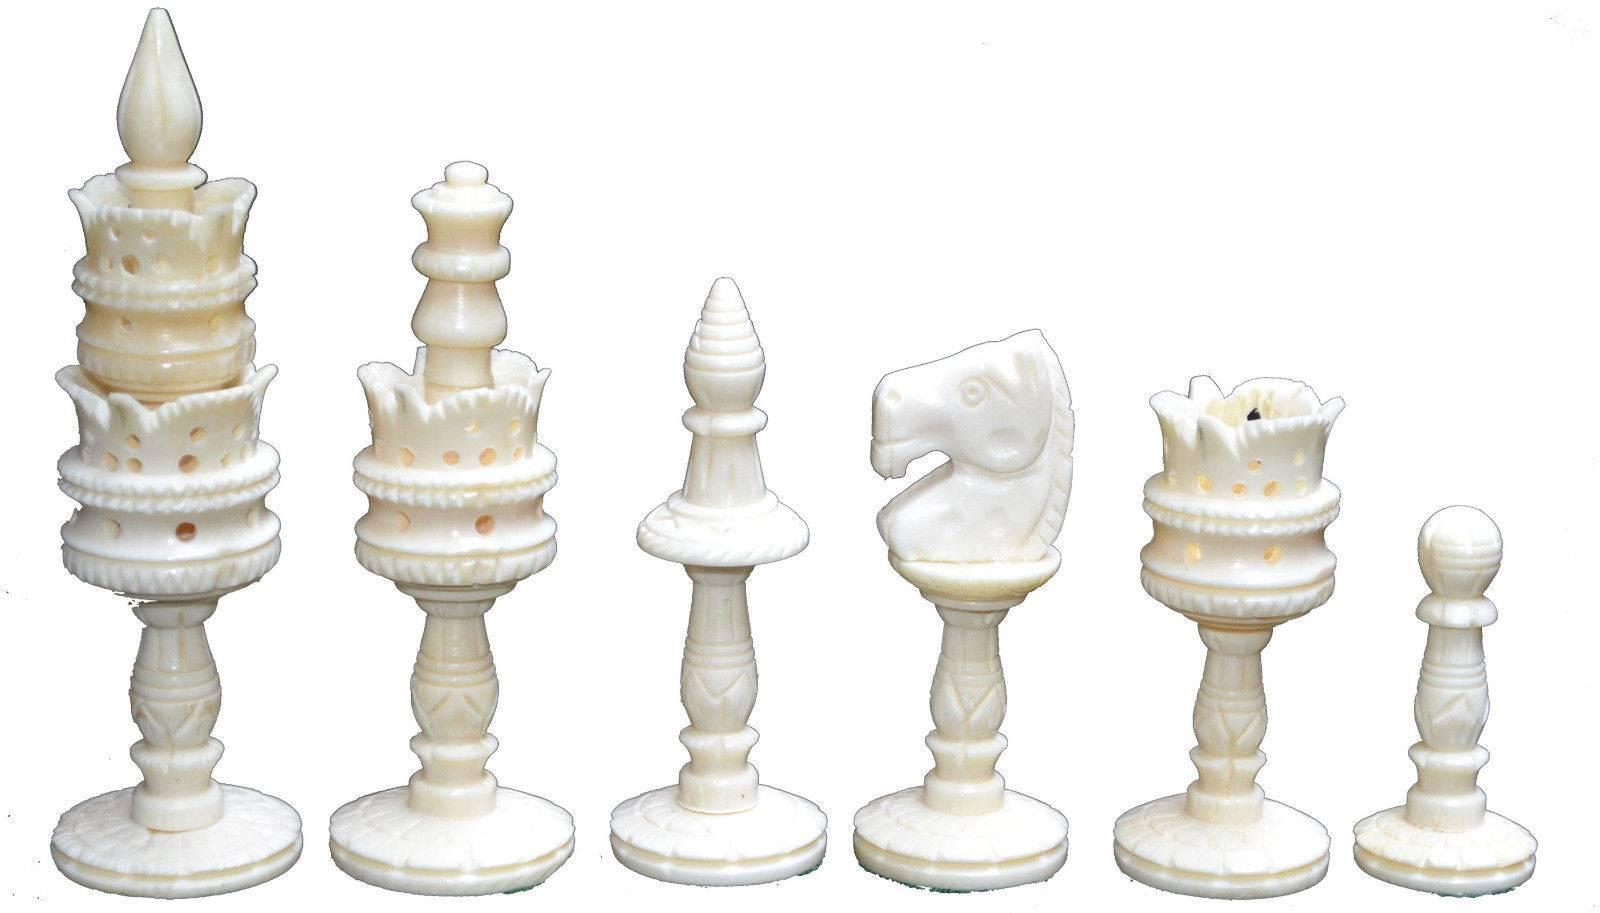 20th Century Large Vizagapatam Chess Set with Elaborately Hand-Carved Bone Chess Pieces